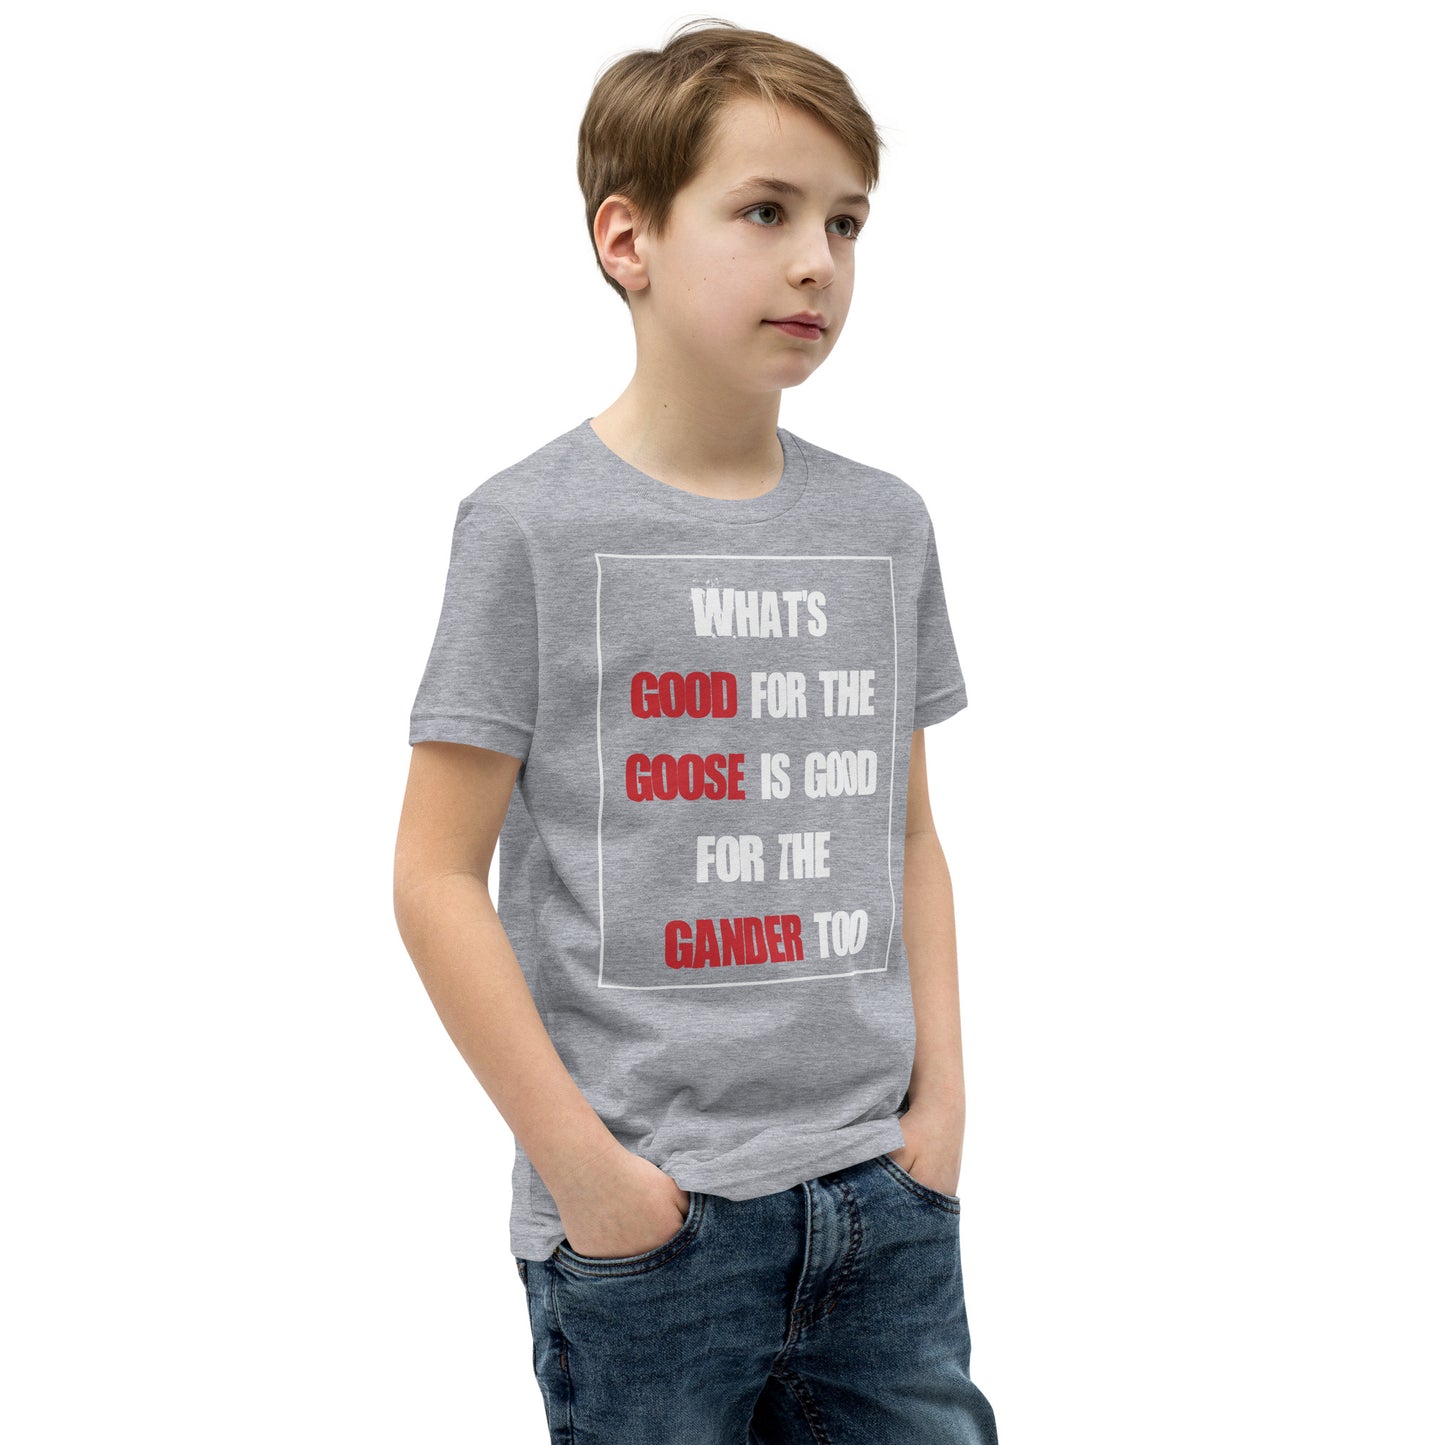 What's Good for the Goose is Good for the Gander too / Kids T-Shirt